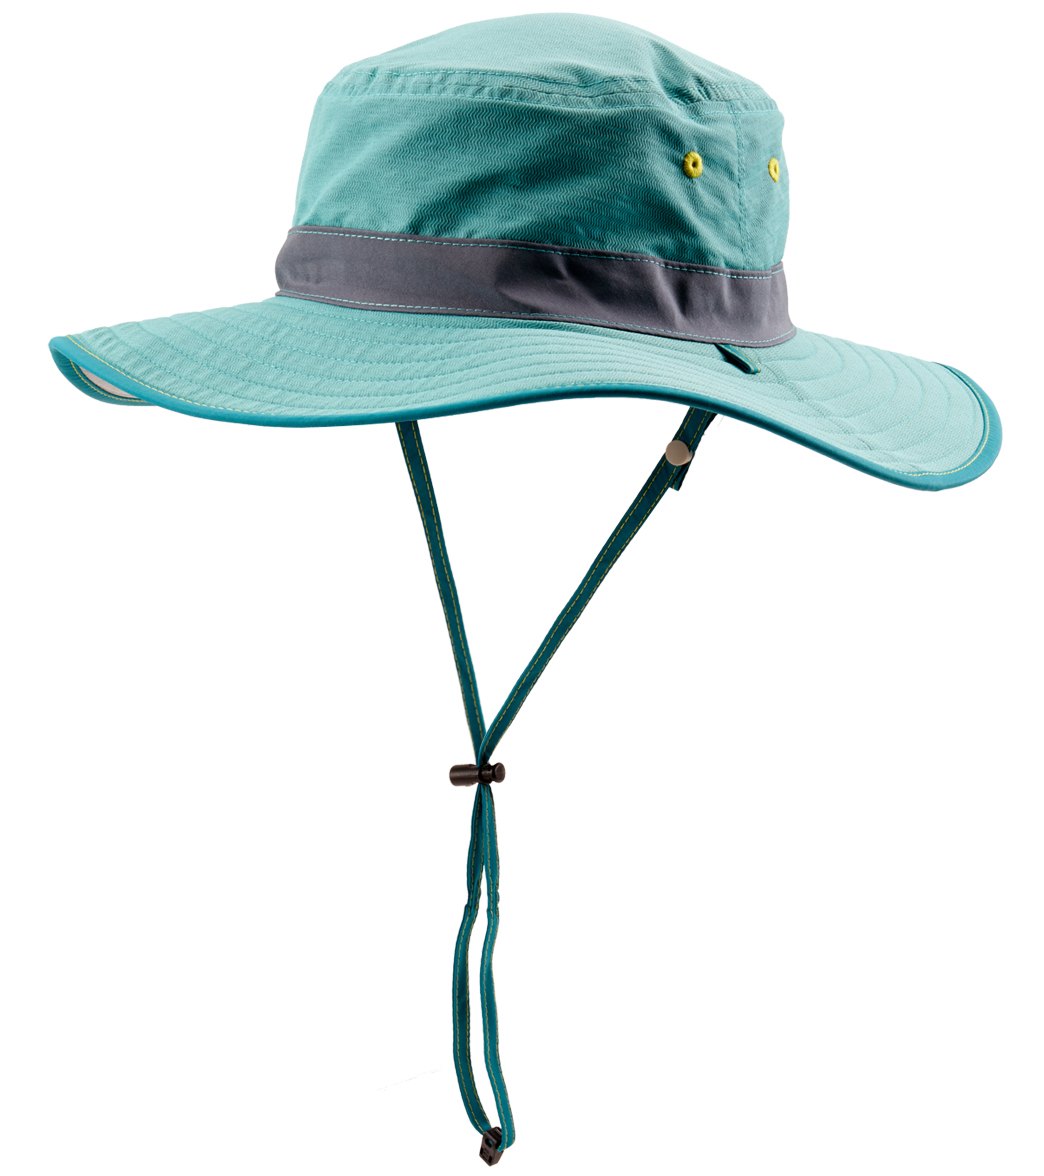 Sunday Afternoons Women's Clear Creek Boonie Hat - Jade Nylon/Polyester - Swimoutlet.com